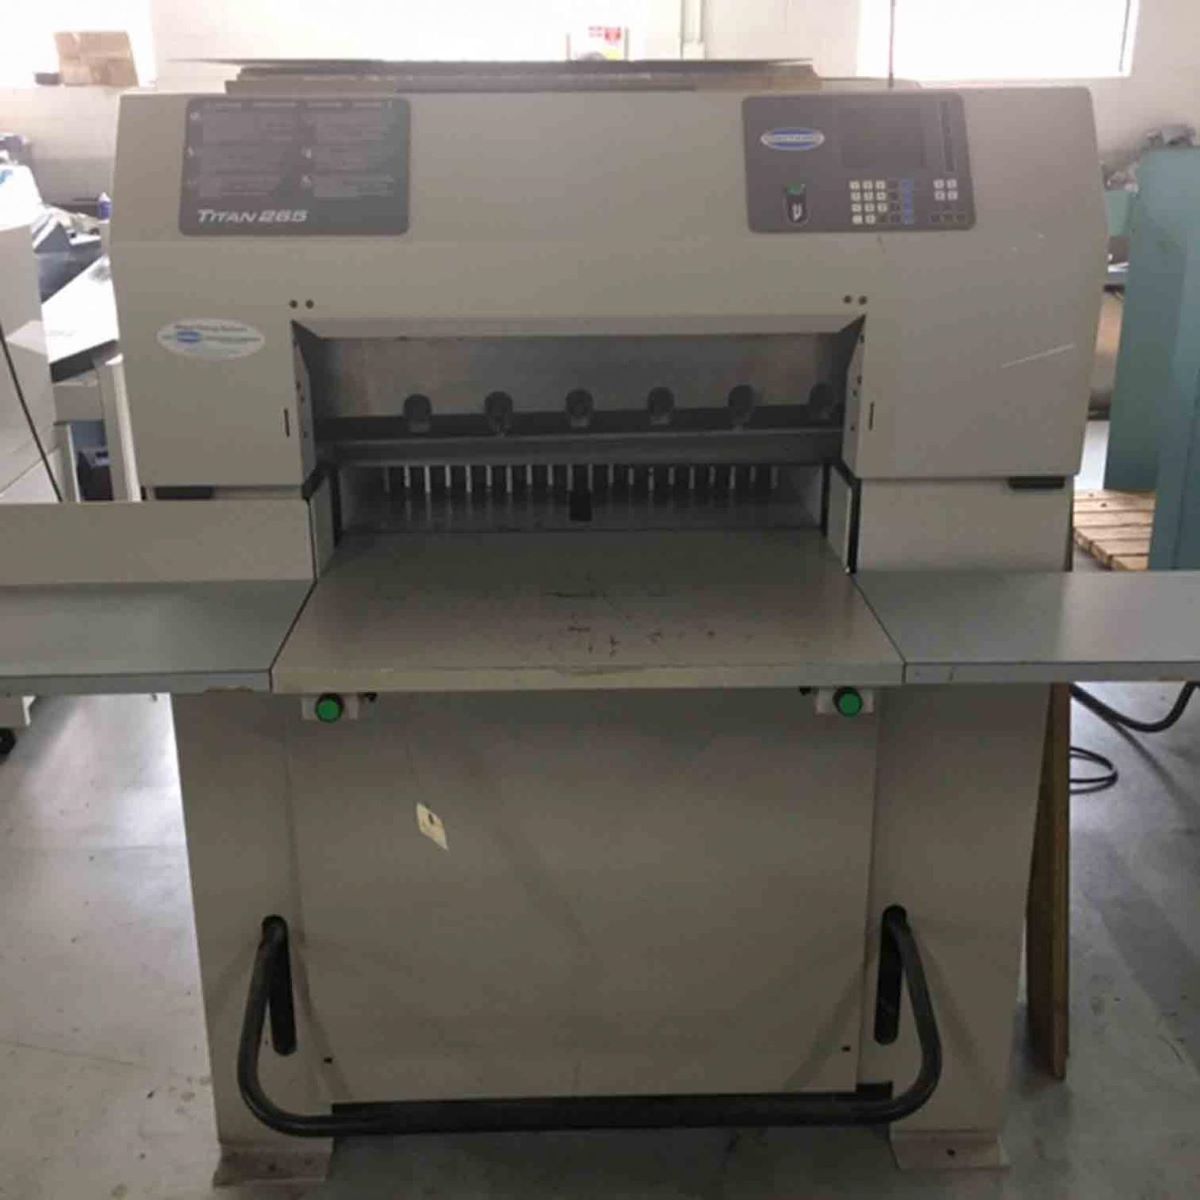 Challenge Titan 265 Paper Cutter (Used) Item # UE-042323A